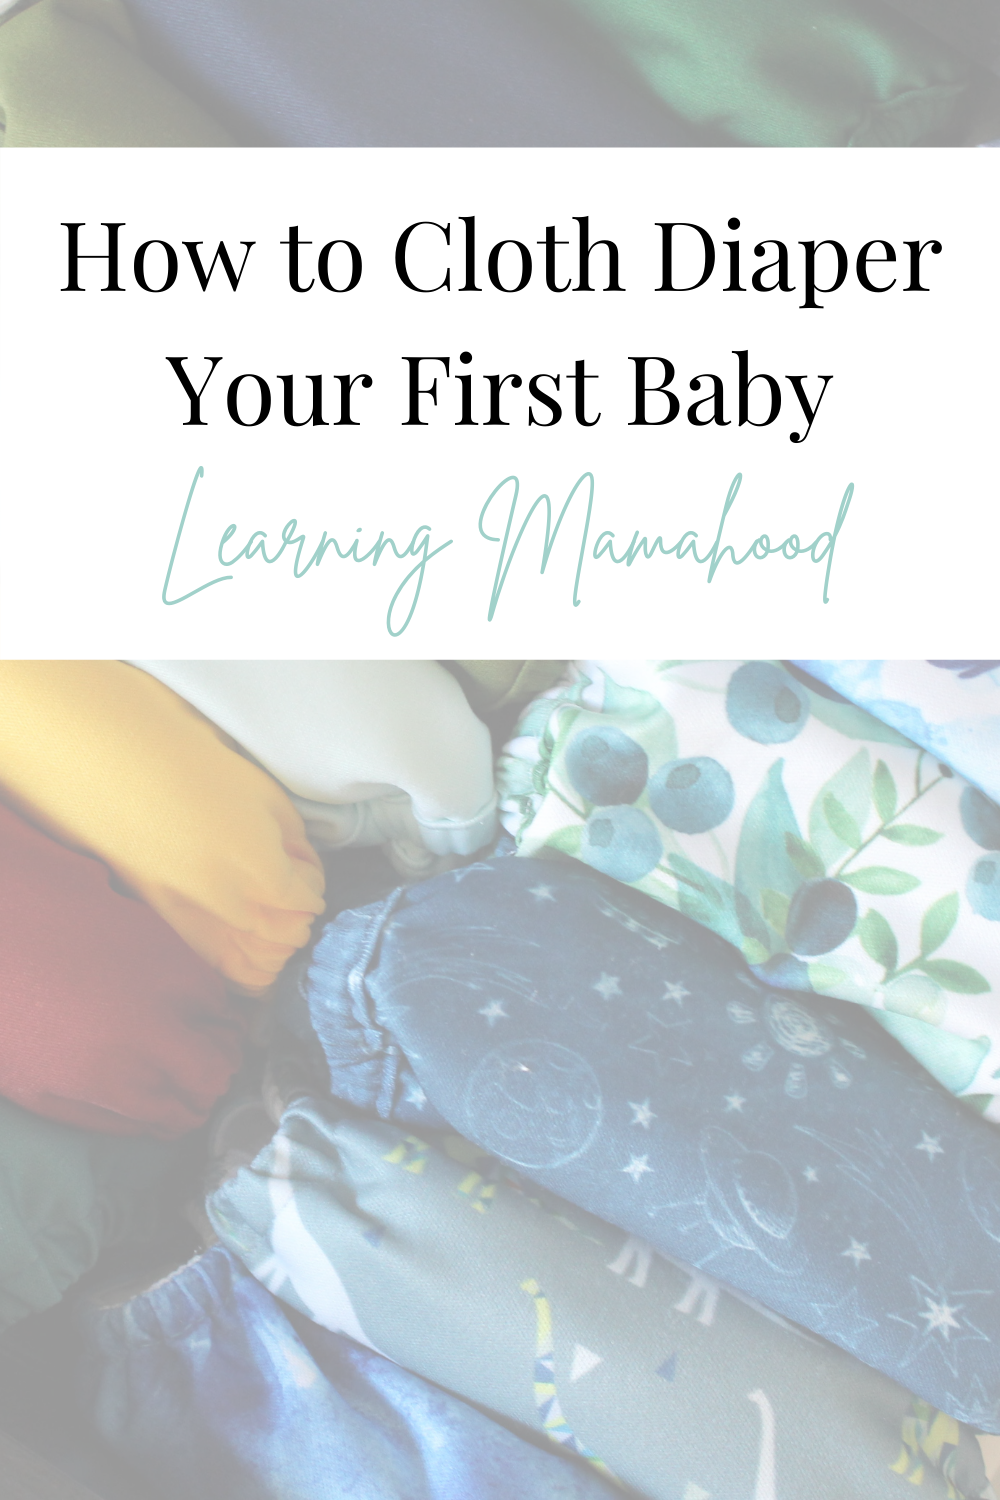 How to Cloth Diaper Your First Baby | Learning Mamahood